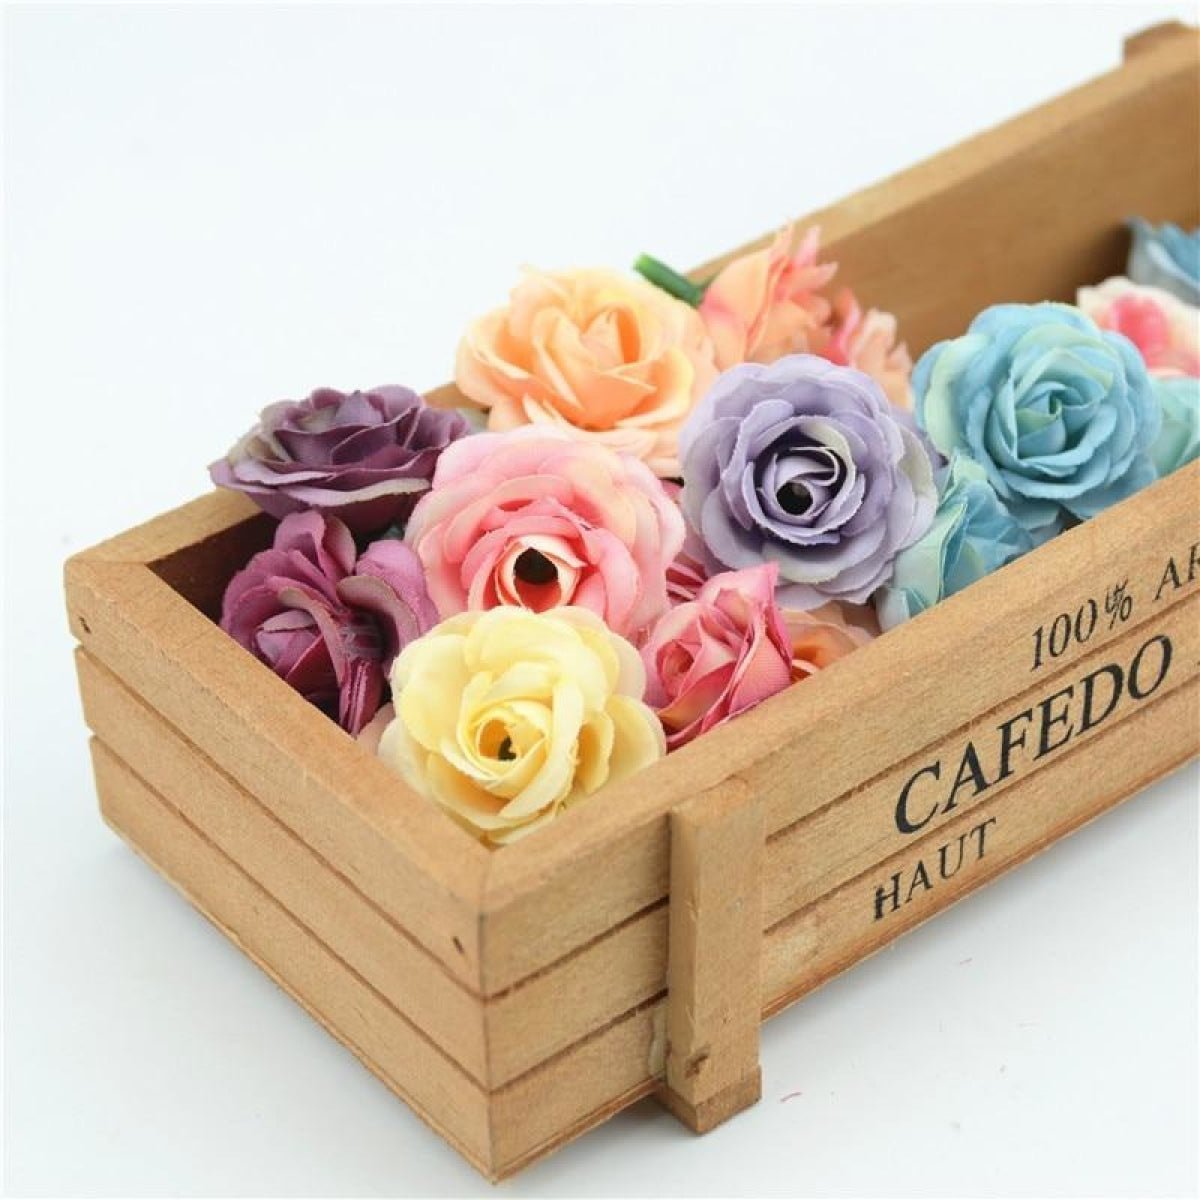 10pcs 2.5cm Mini Rose Cloth Artificial Flower For Wedding Party Home Decorations - Rose - - Asia Sell